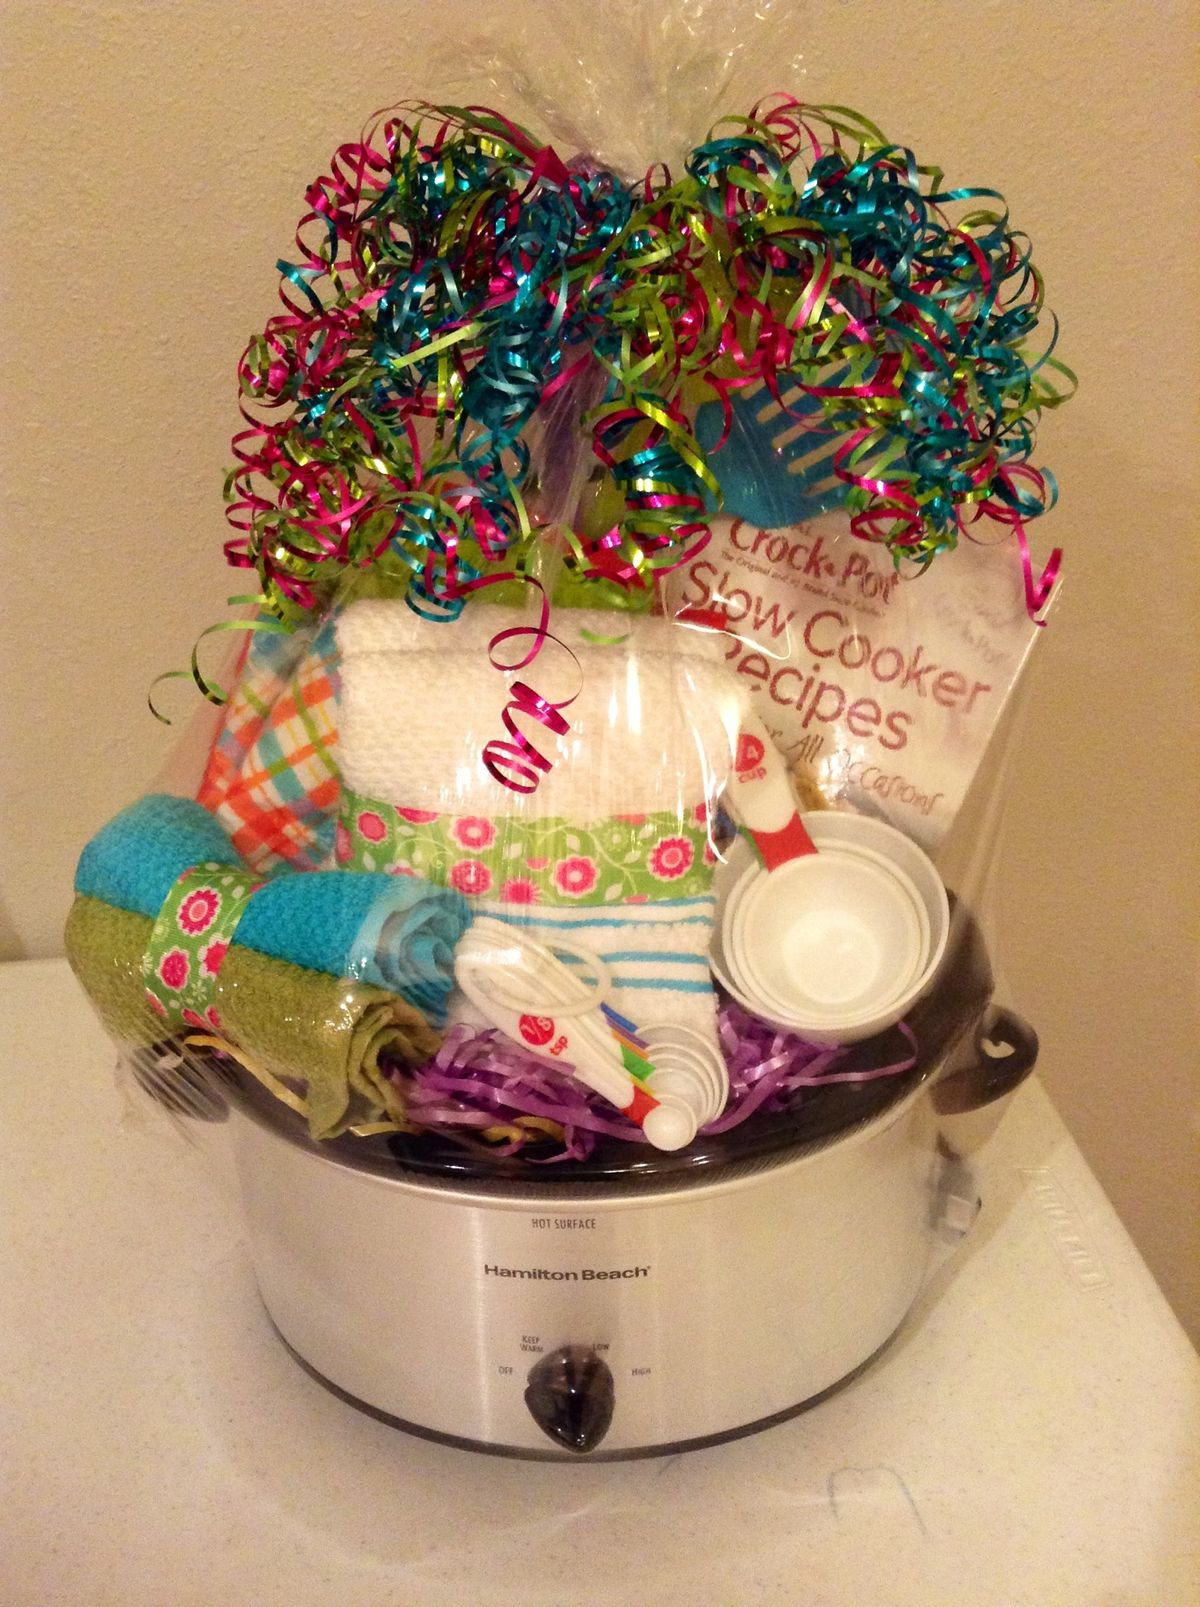 Auction Gift Basket Ideas
 1000 images about Themed auction basket ideas on Pinterest